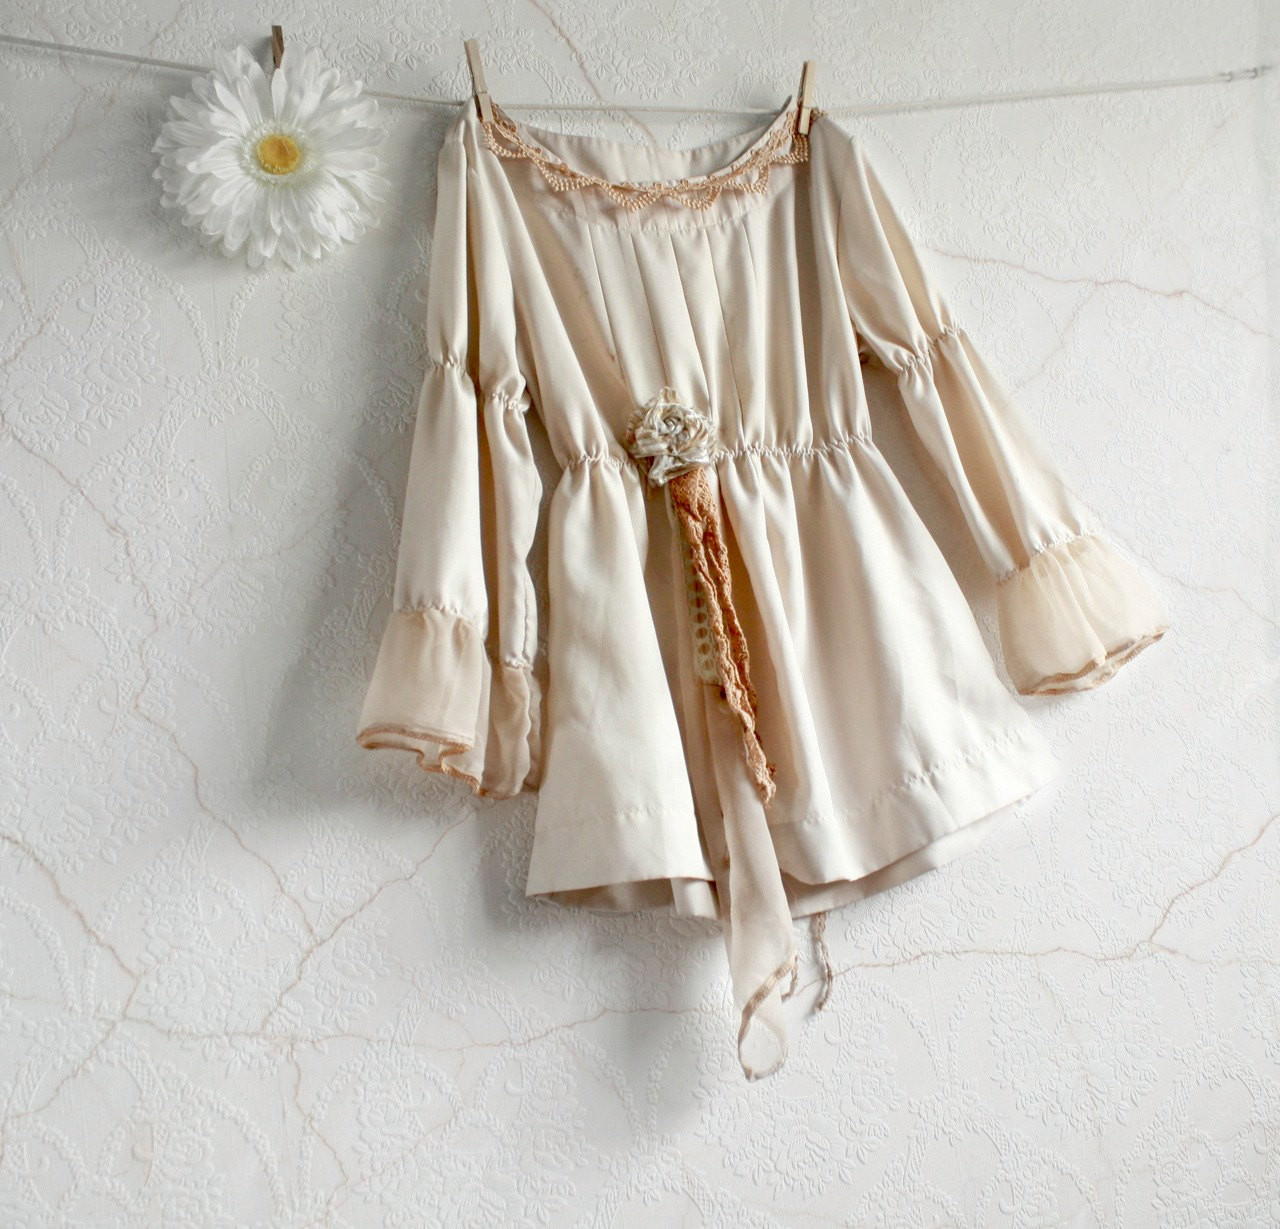 Best ideas about Shabby Chic Clothes
. Save or Pin Cream Blouse Shabby Chic Clothing Women s by Now.